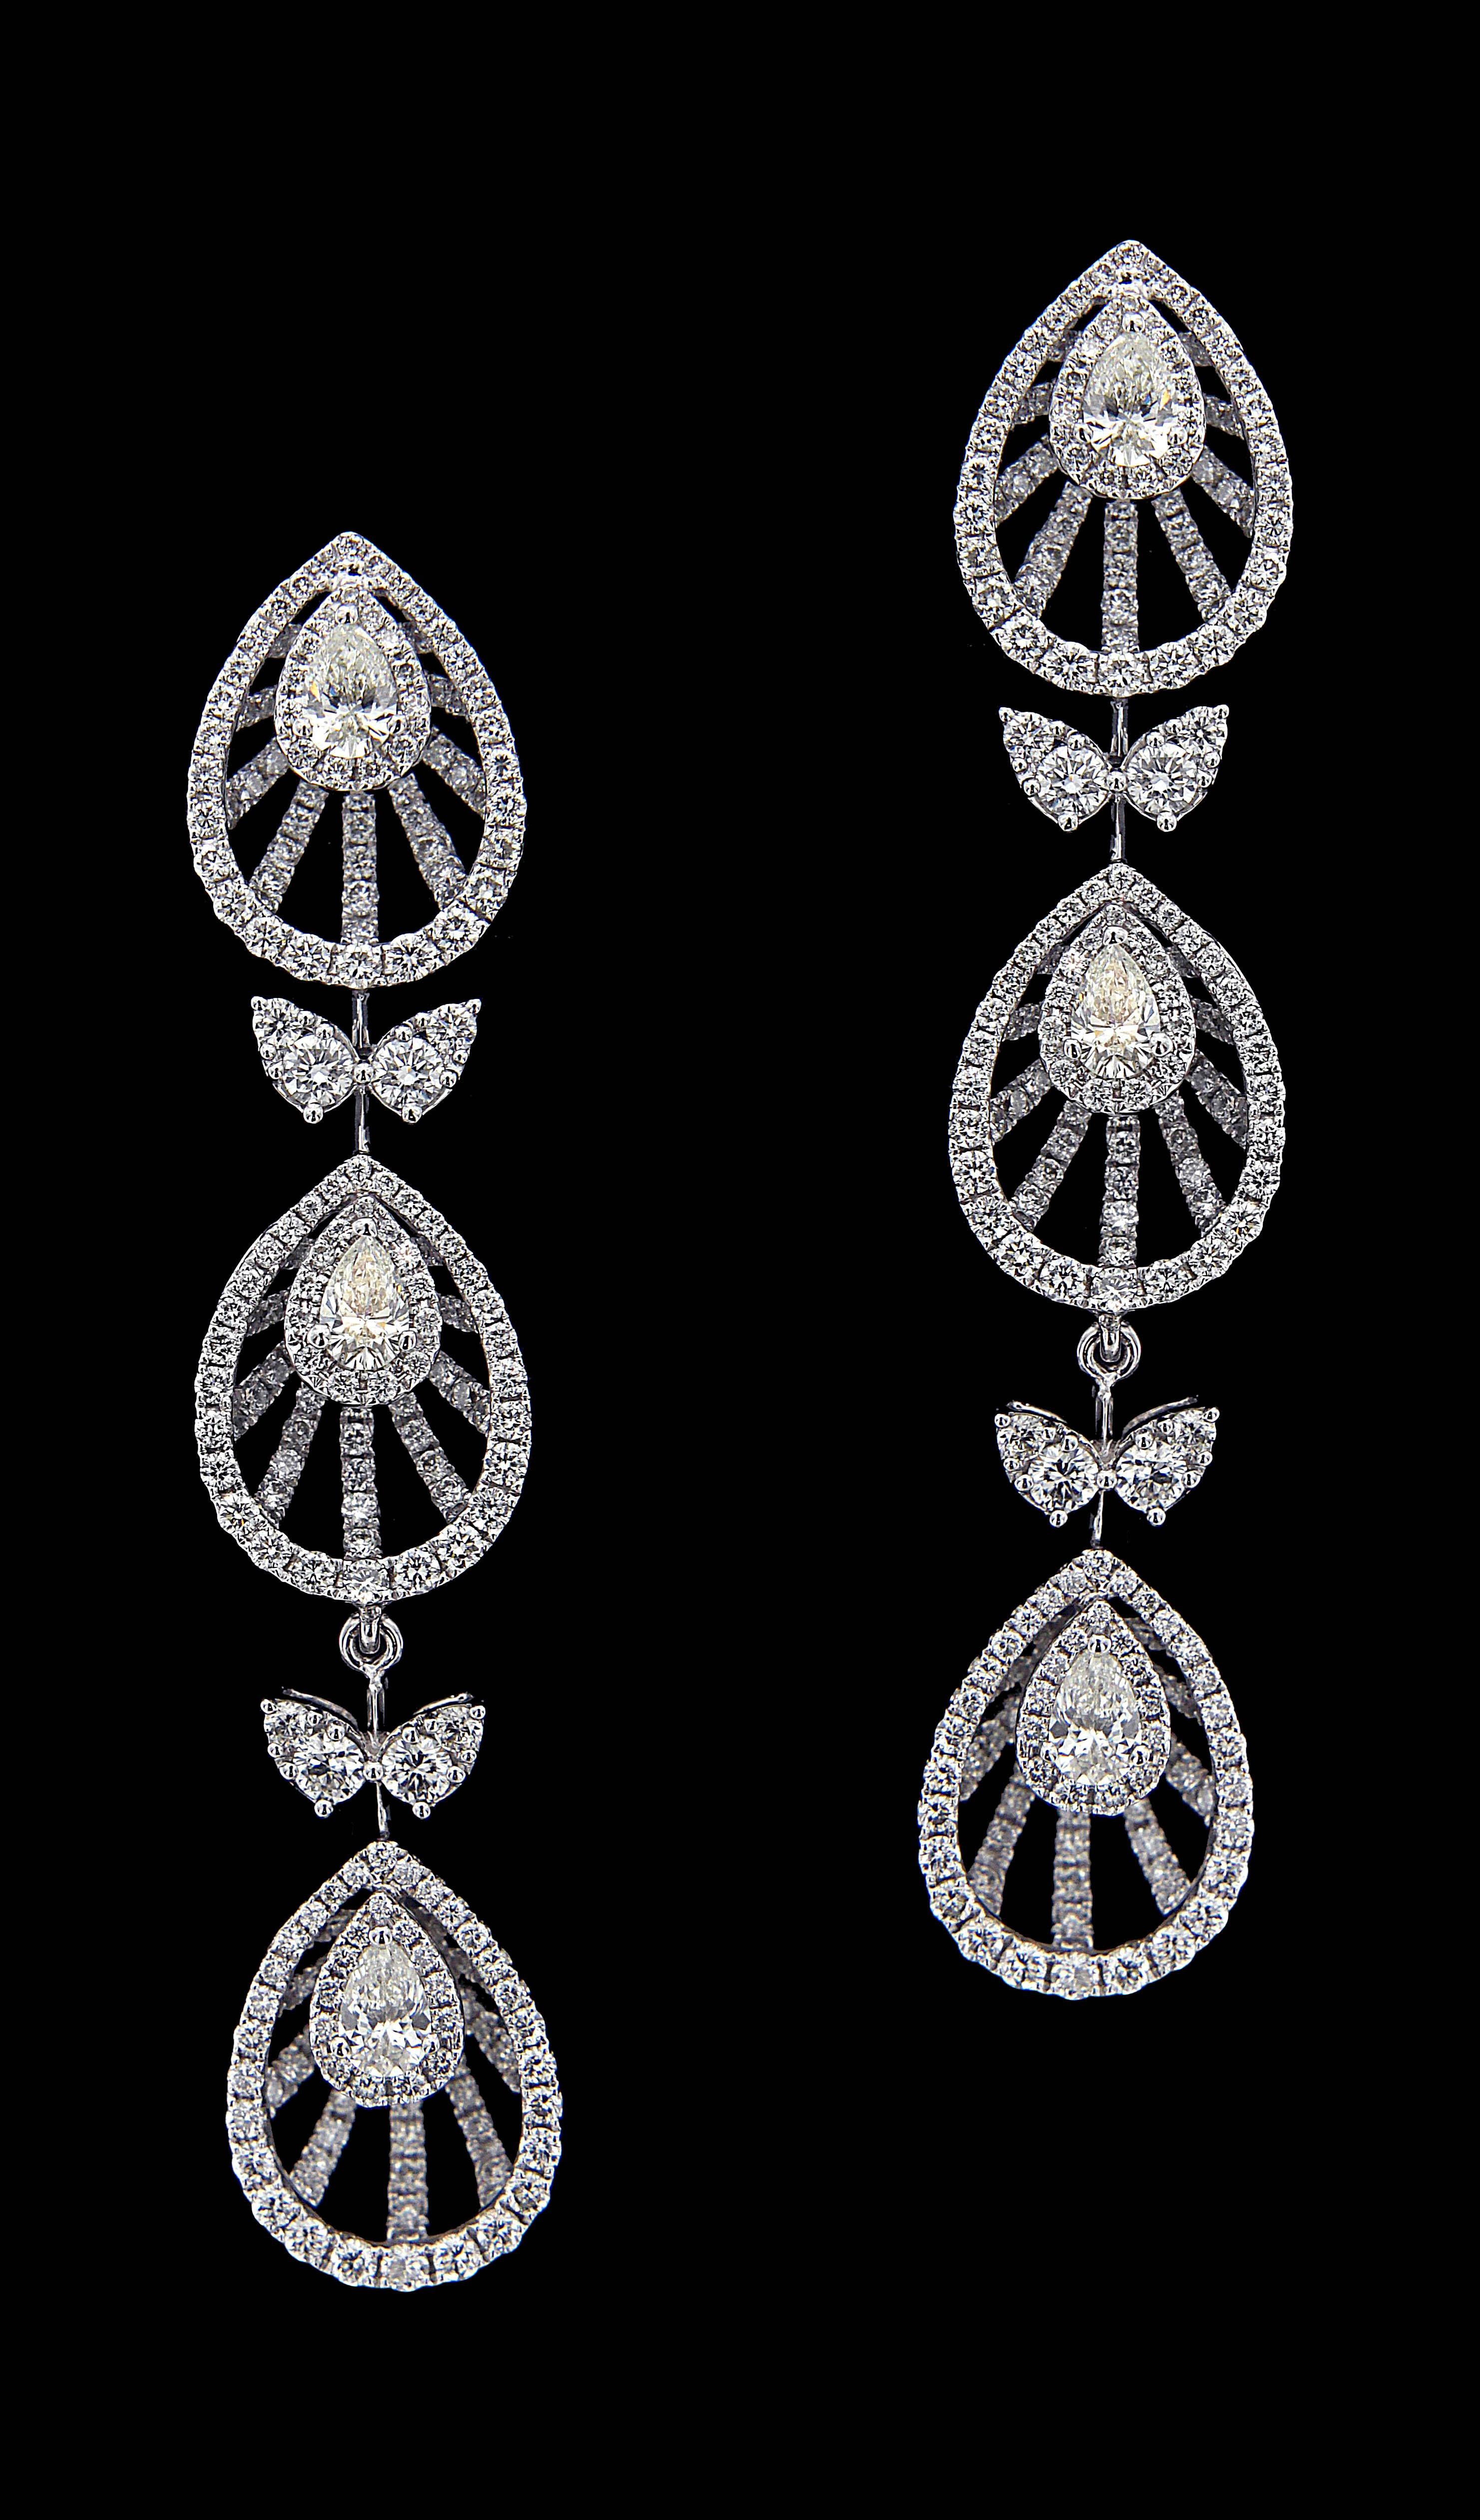 Scintillating 18 Karat White Gold And Diamond Wedding And Engagement Set .

Earrings:
Diamonds of approximately 4.294 carats, mounted on 18 karat white gold earring. The earring weighs approximately around 13.341 grams.

Please note: The charges